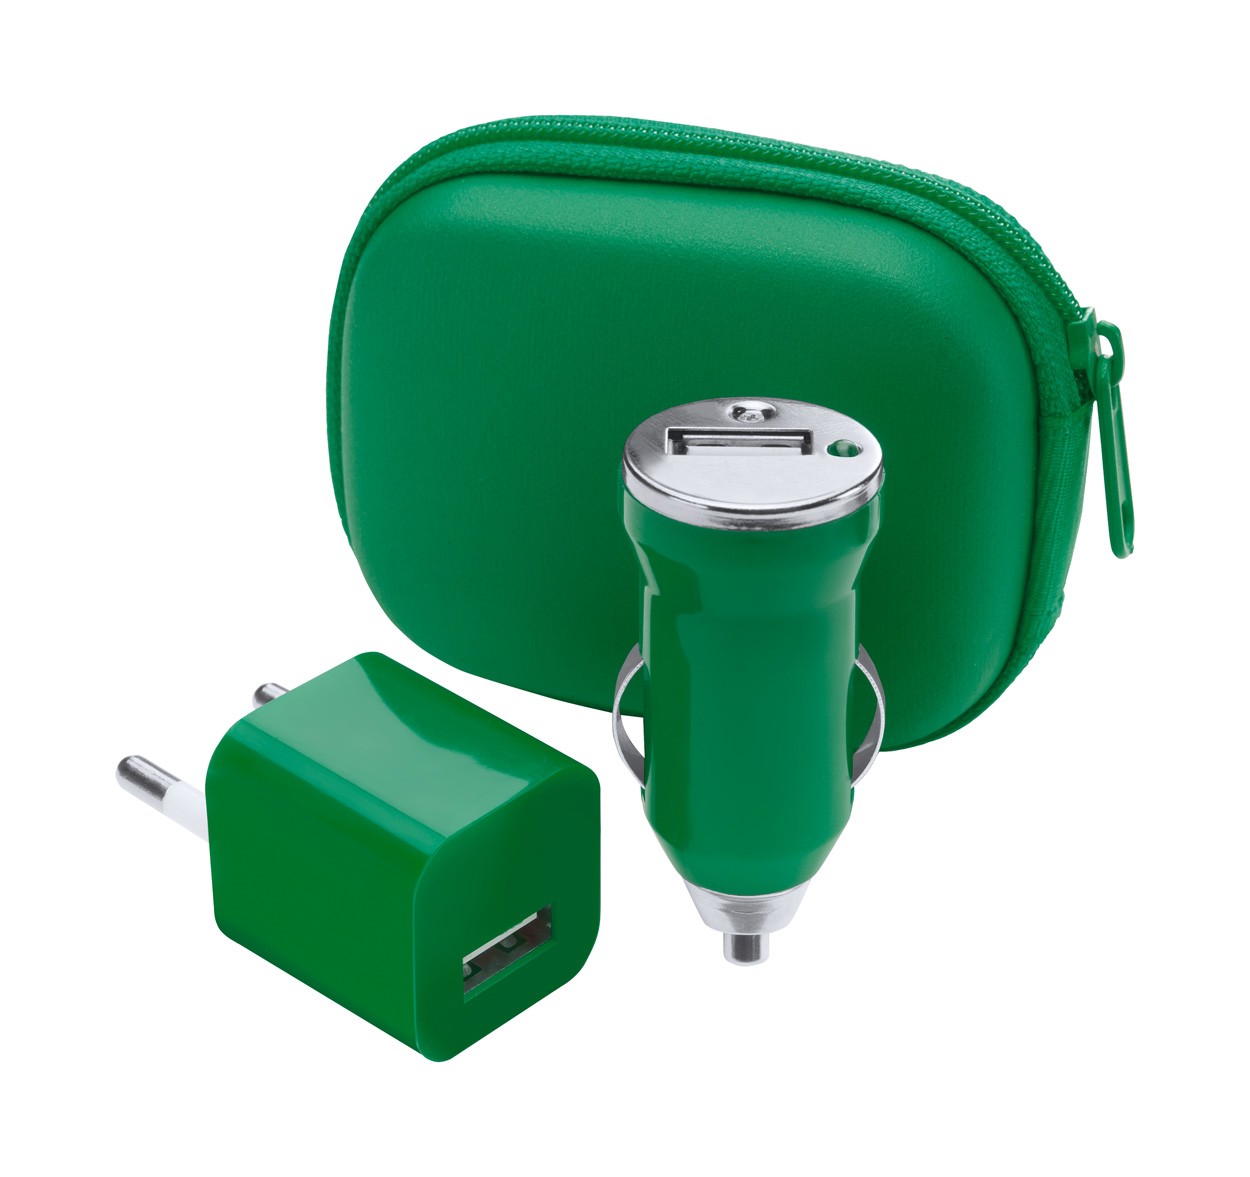 Usb Charger Set Canox - Green / White